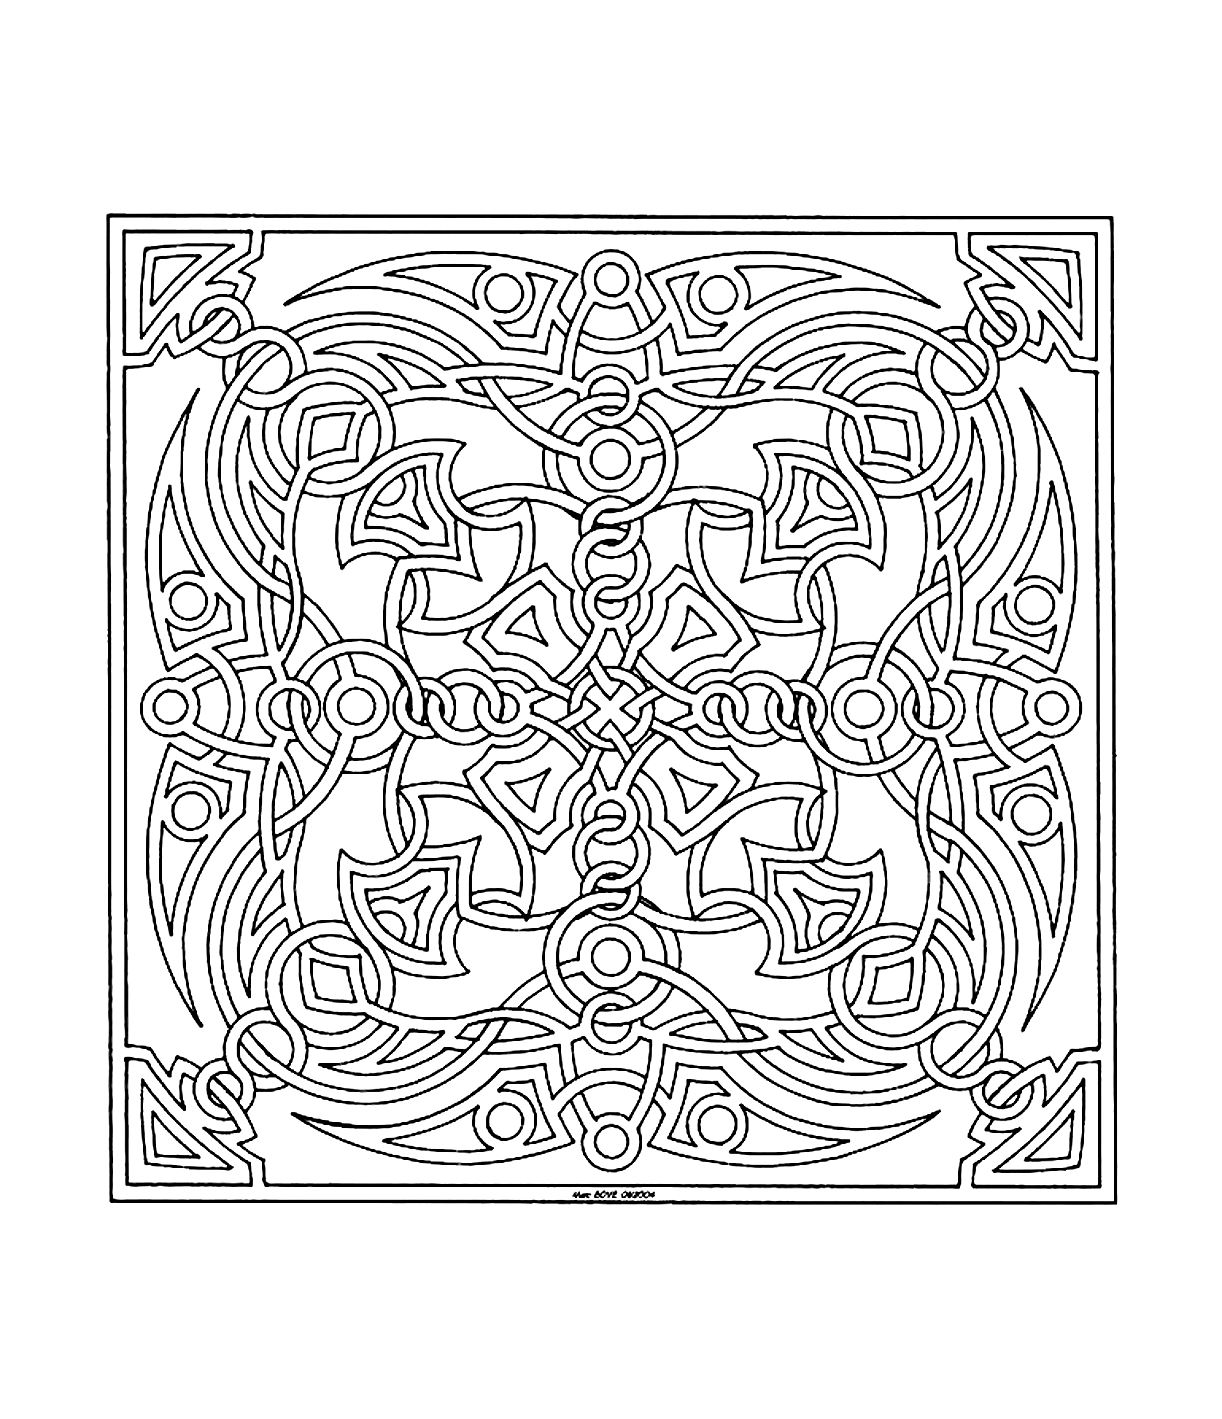 Mandala to color zen relax free - 31